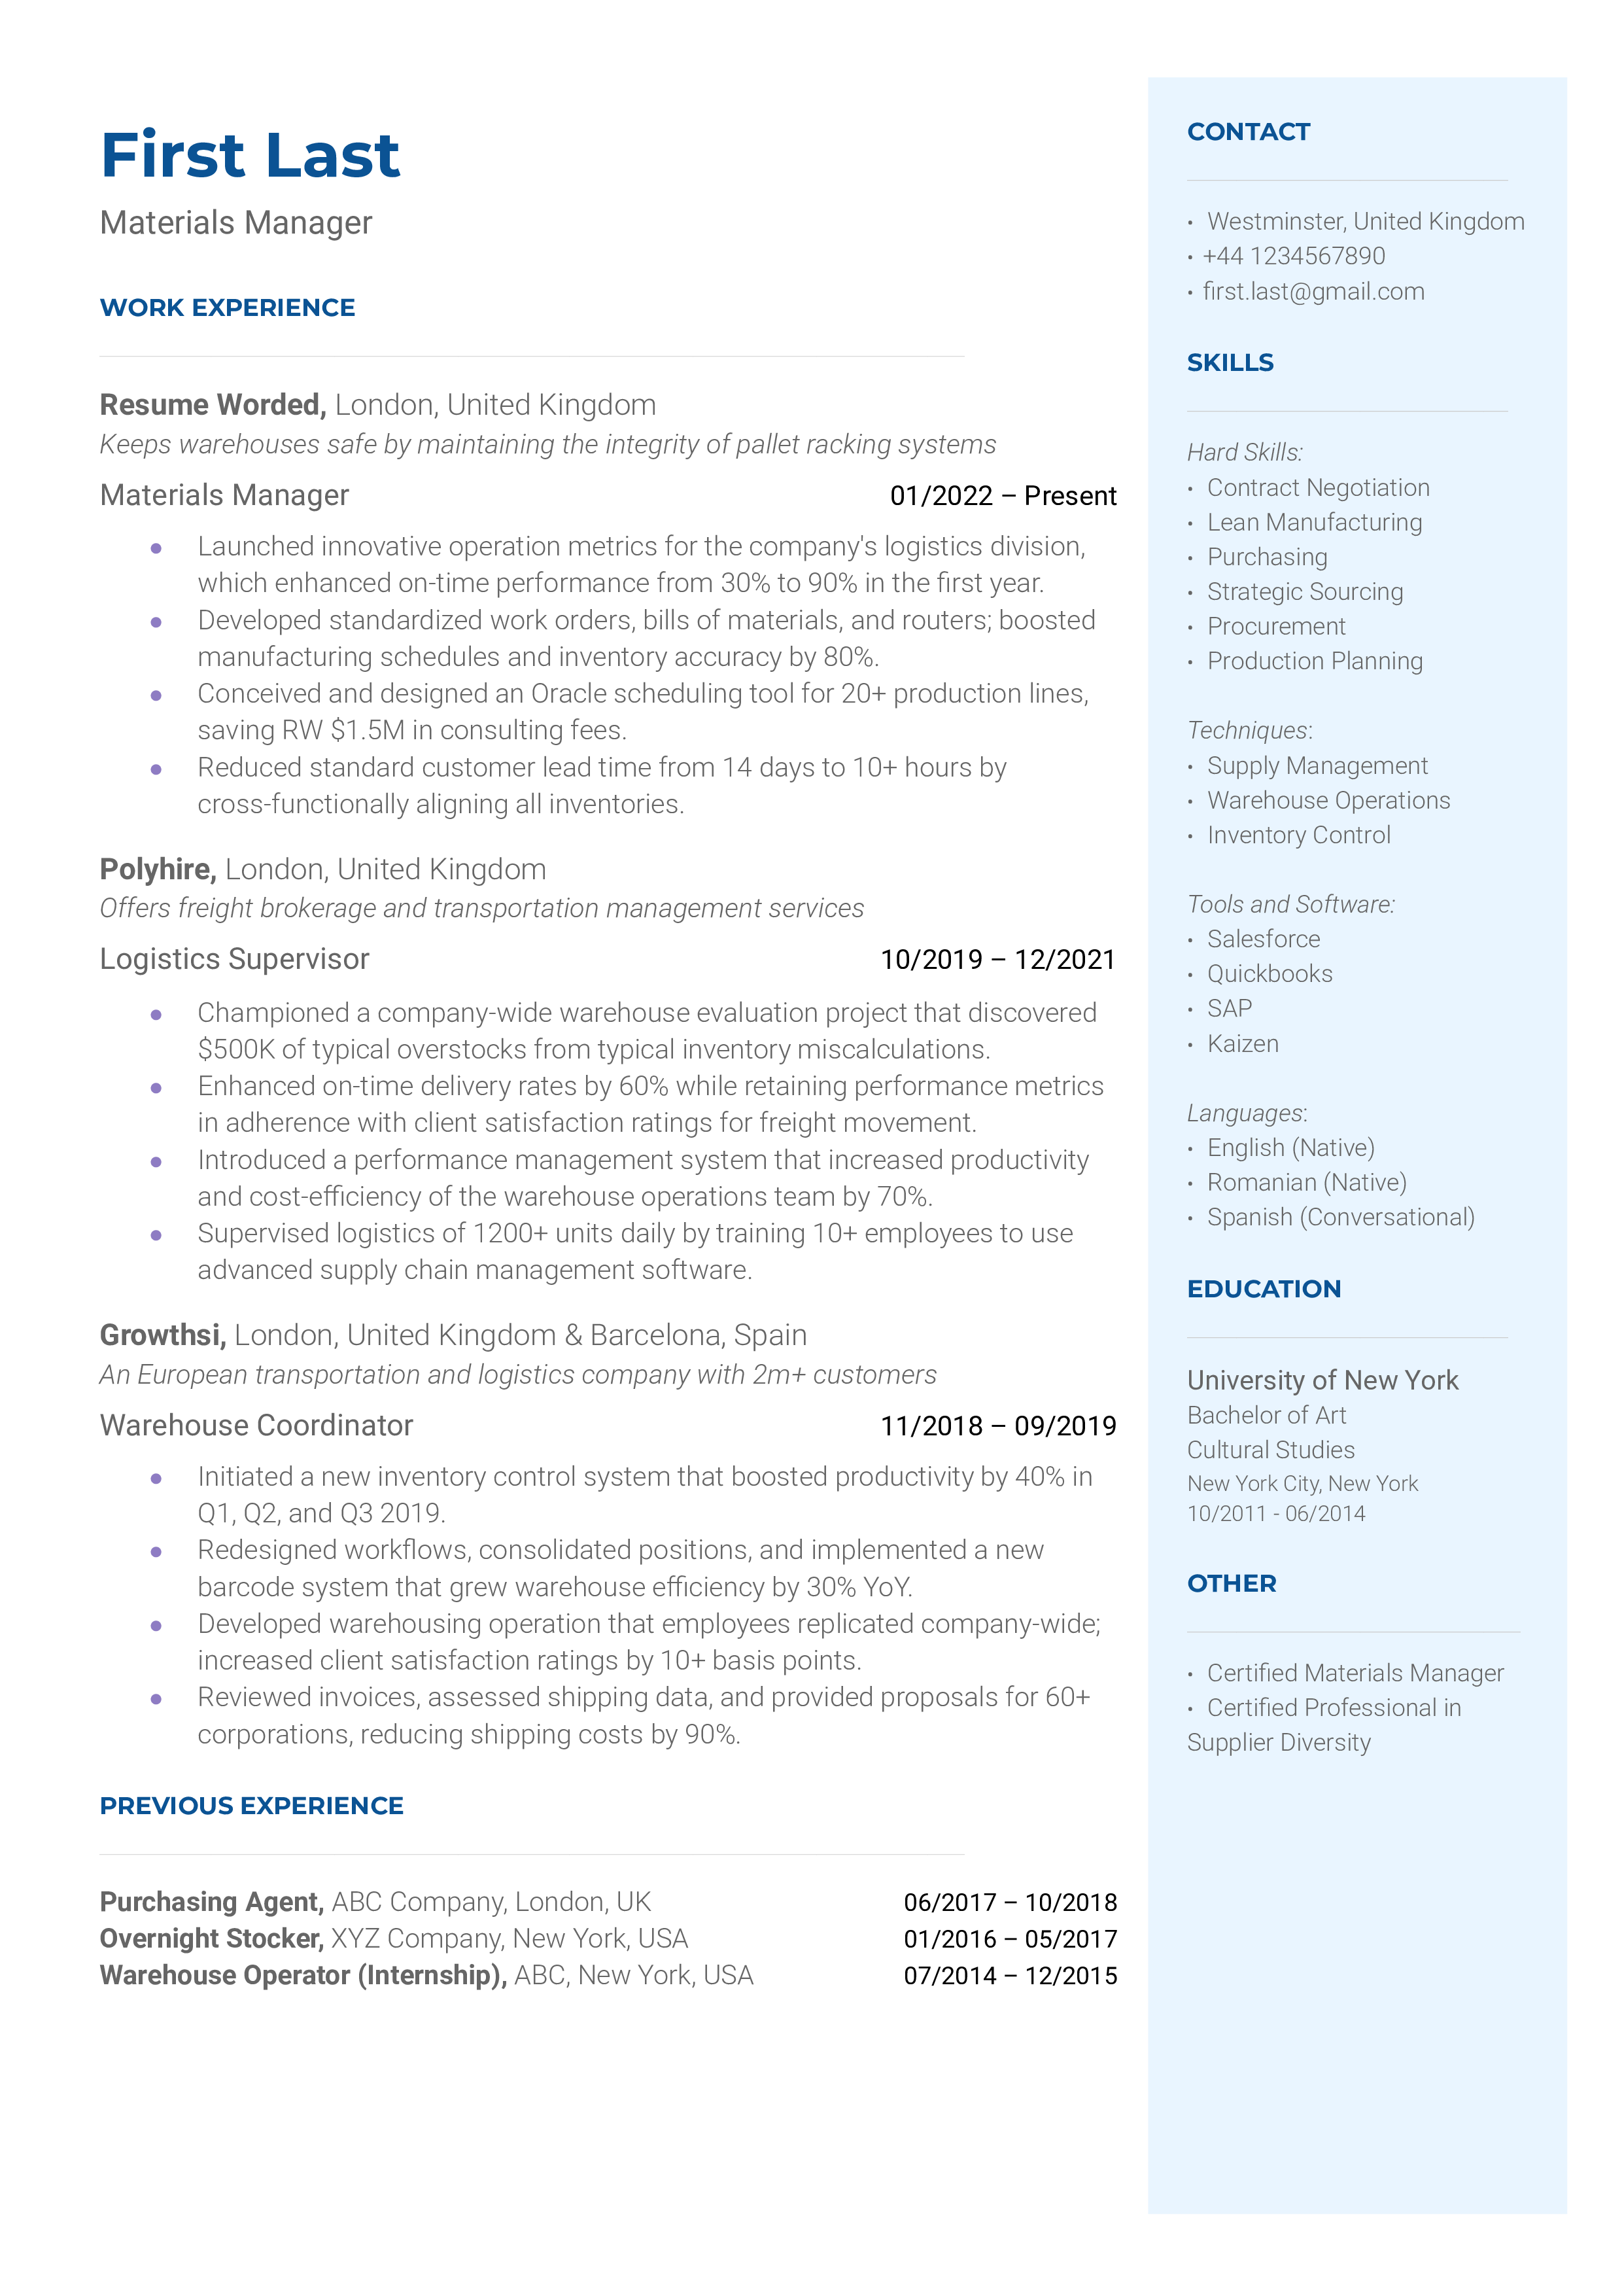 Materials Manager Resume Sample